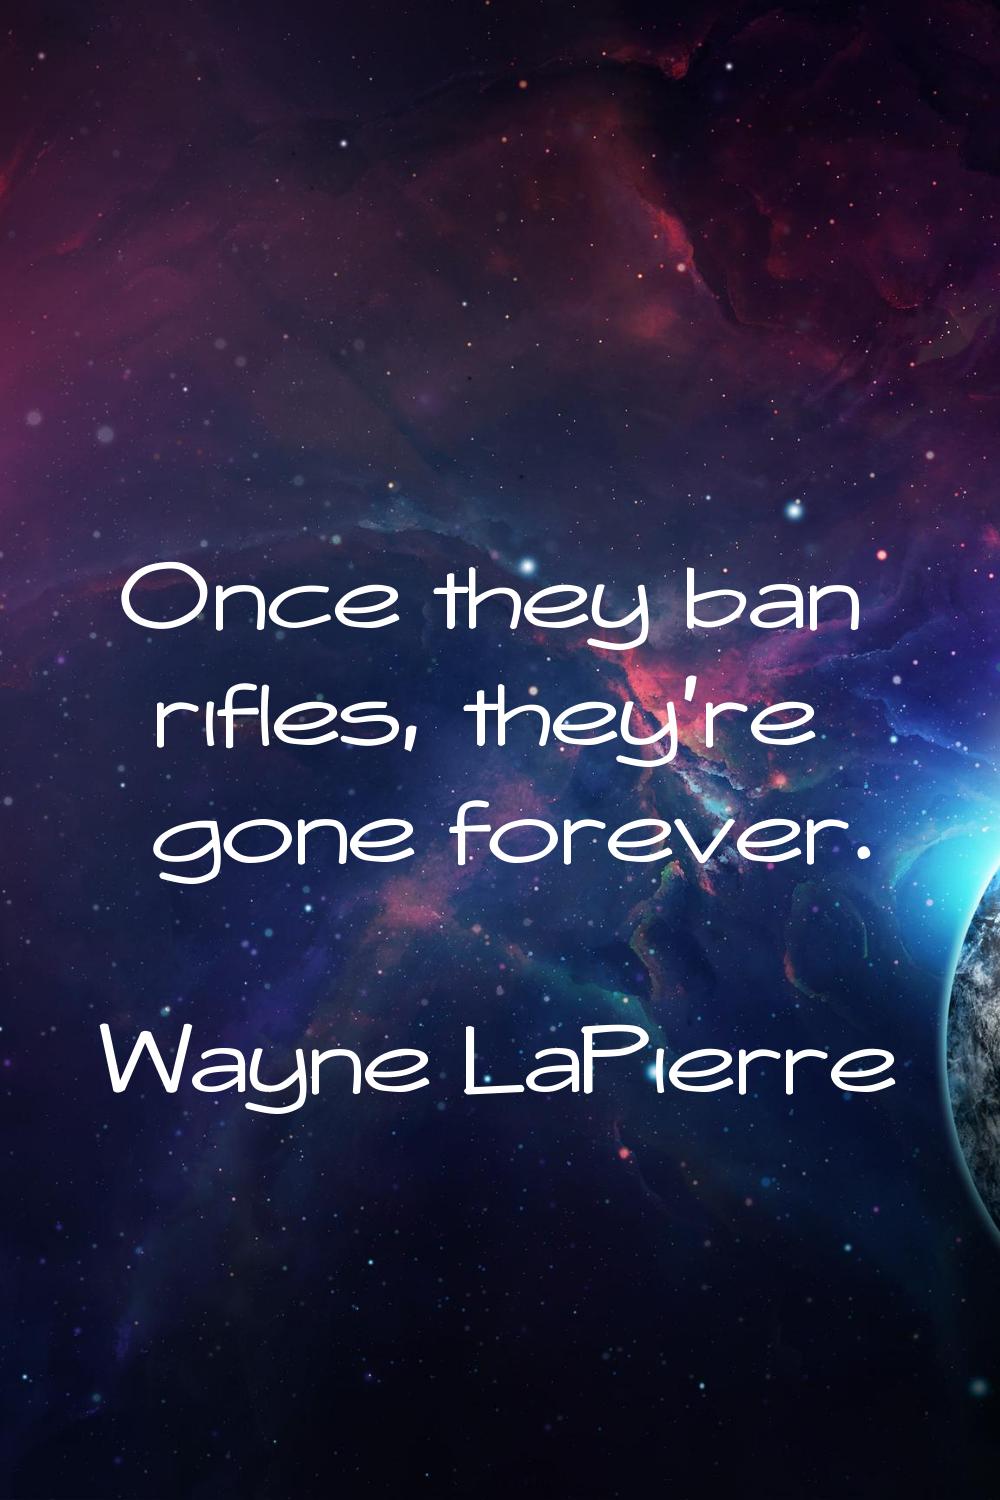 Once they ban rifles, they're gone forever.